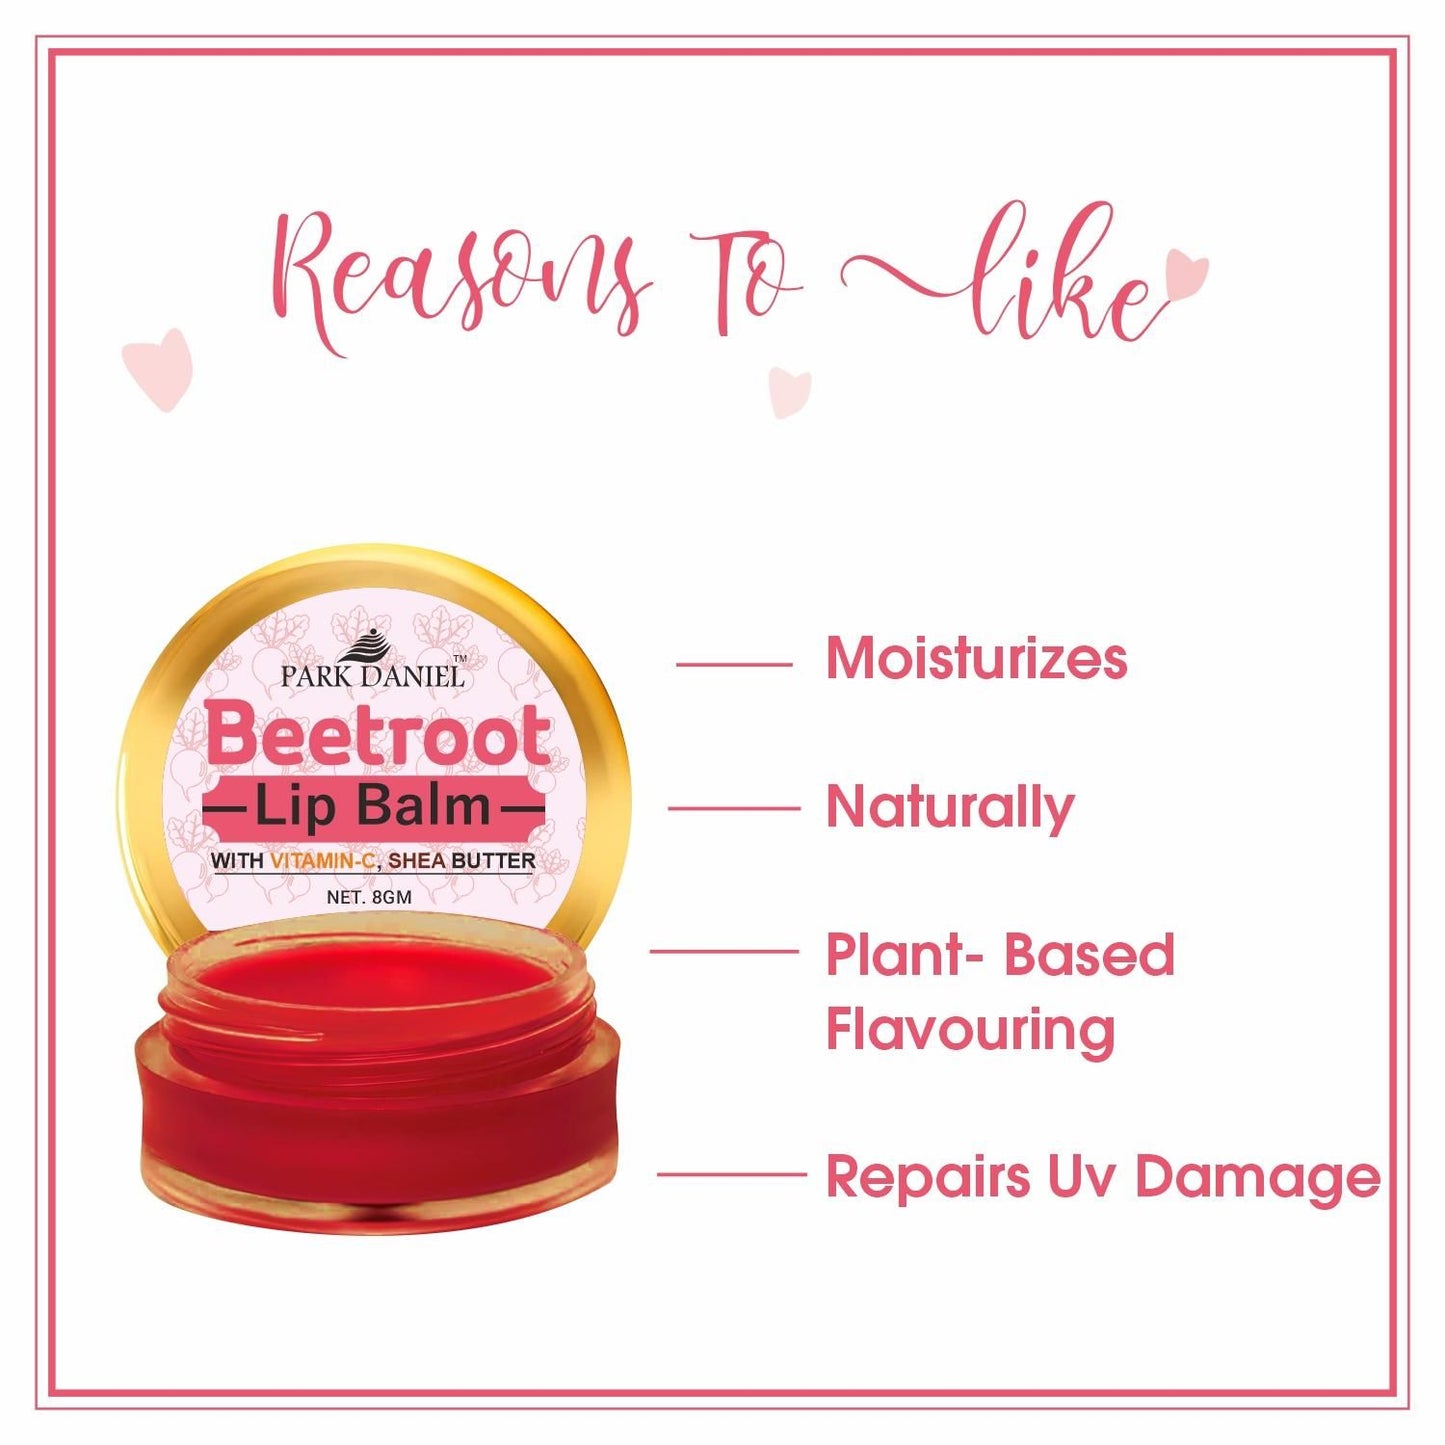 Park Daniel Premium Beetroot Lip Balm - Enriched With Vitamin E & Mango Butter- For Lightening the dark Lips, Lip Care for Dry & Chapped Lips(08 Gms)